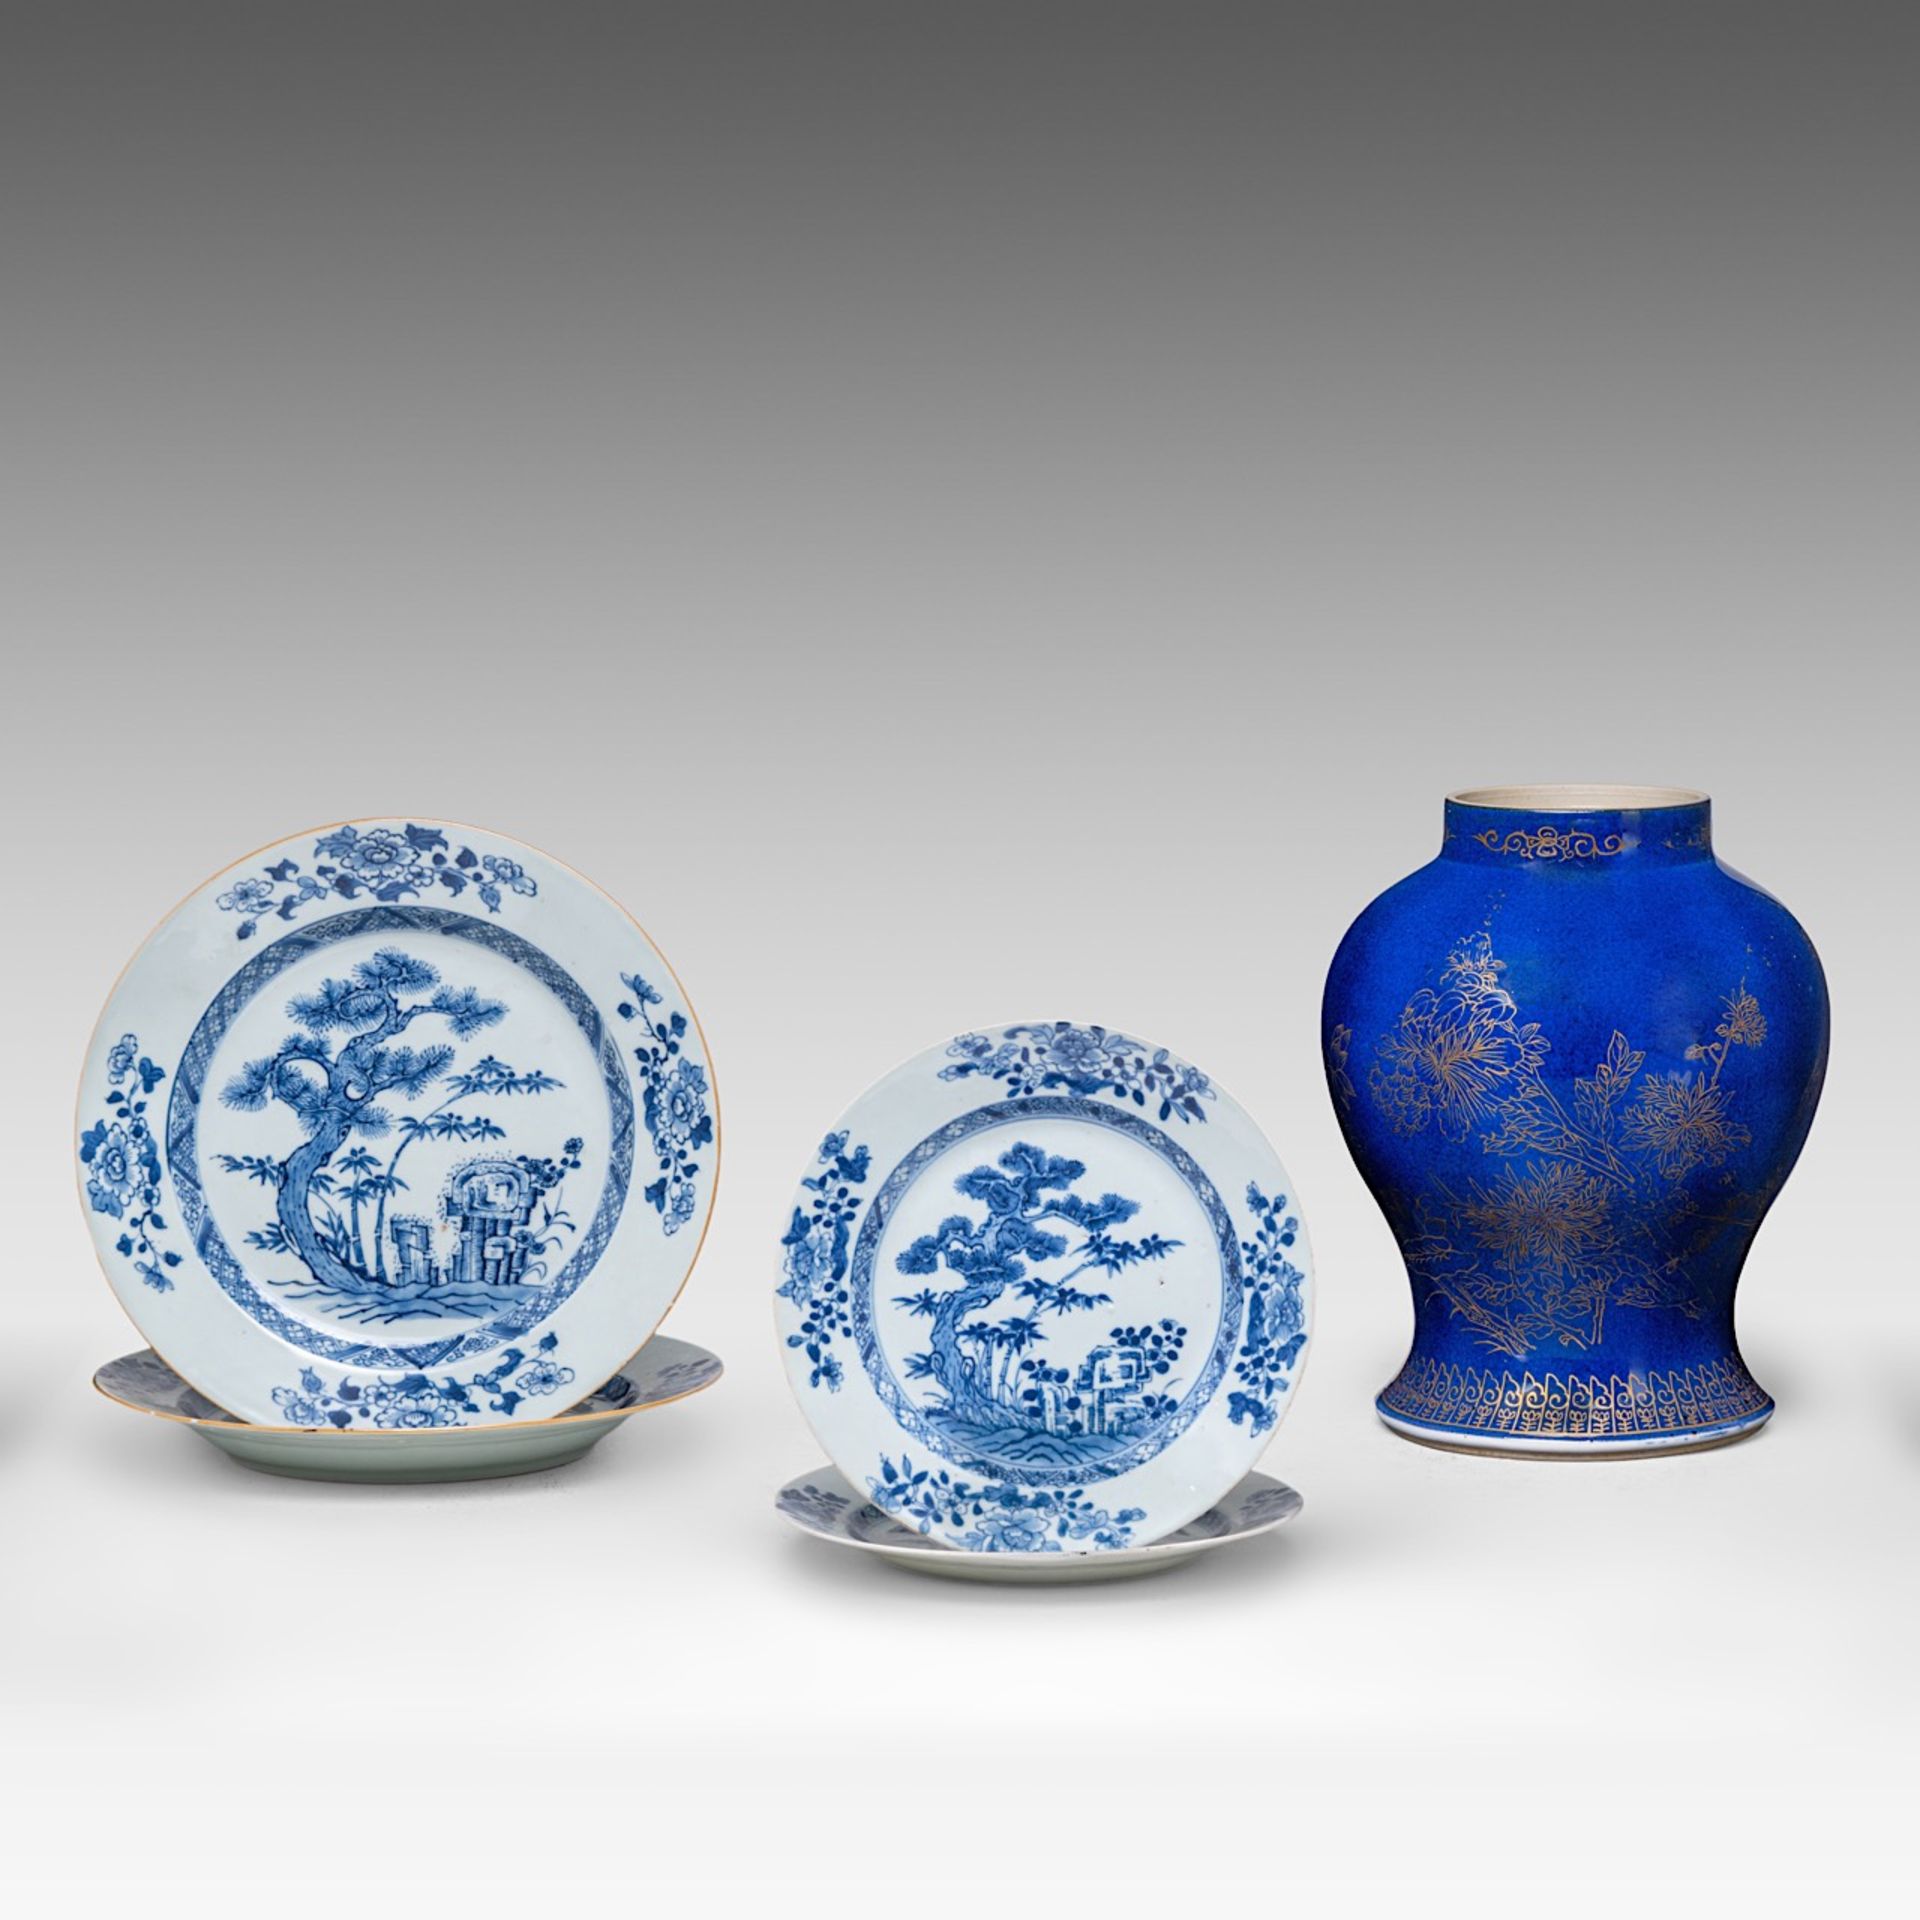 A series of four Chinese blue and white 'Bamboo below Pine' dishes and plates, 18thC, dia 22,5 - 28,